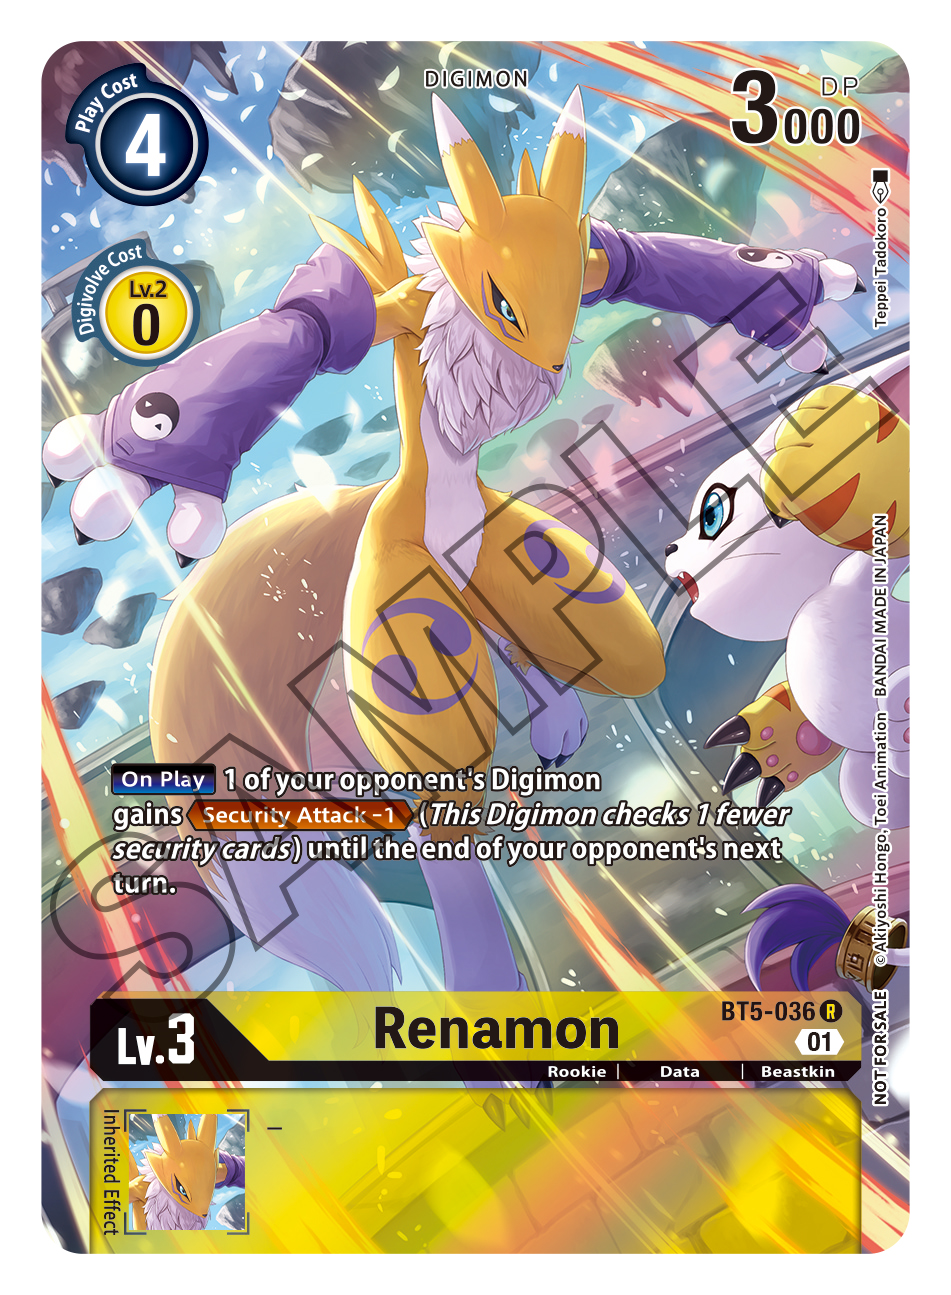 Digimon Card Game Playmat and Card Set 1 -Digimon Tamers-